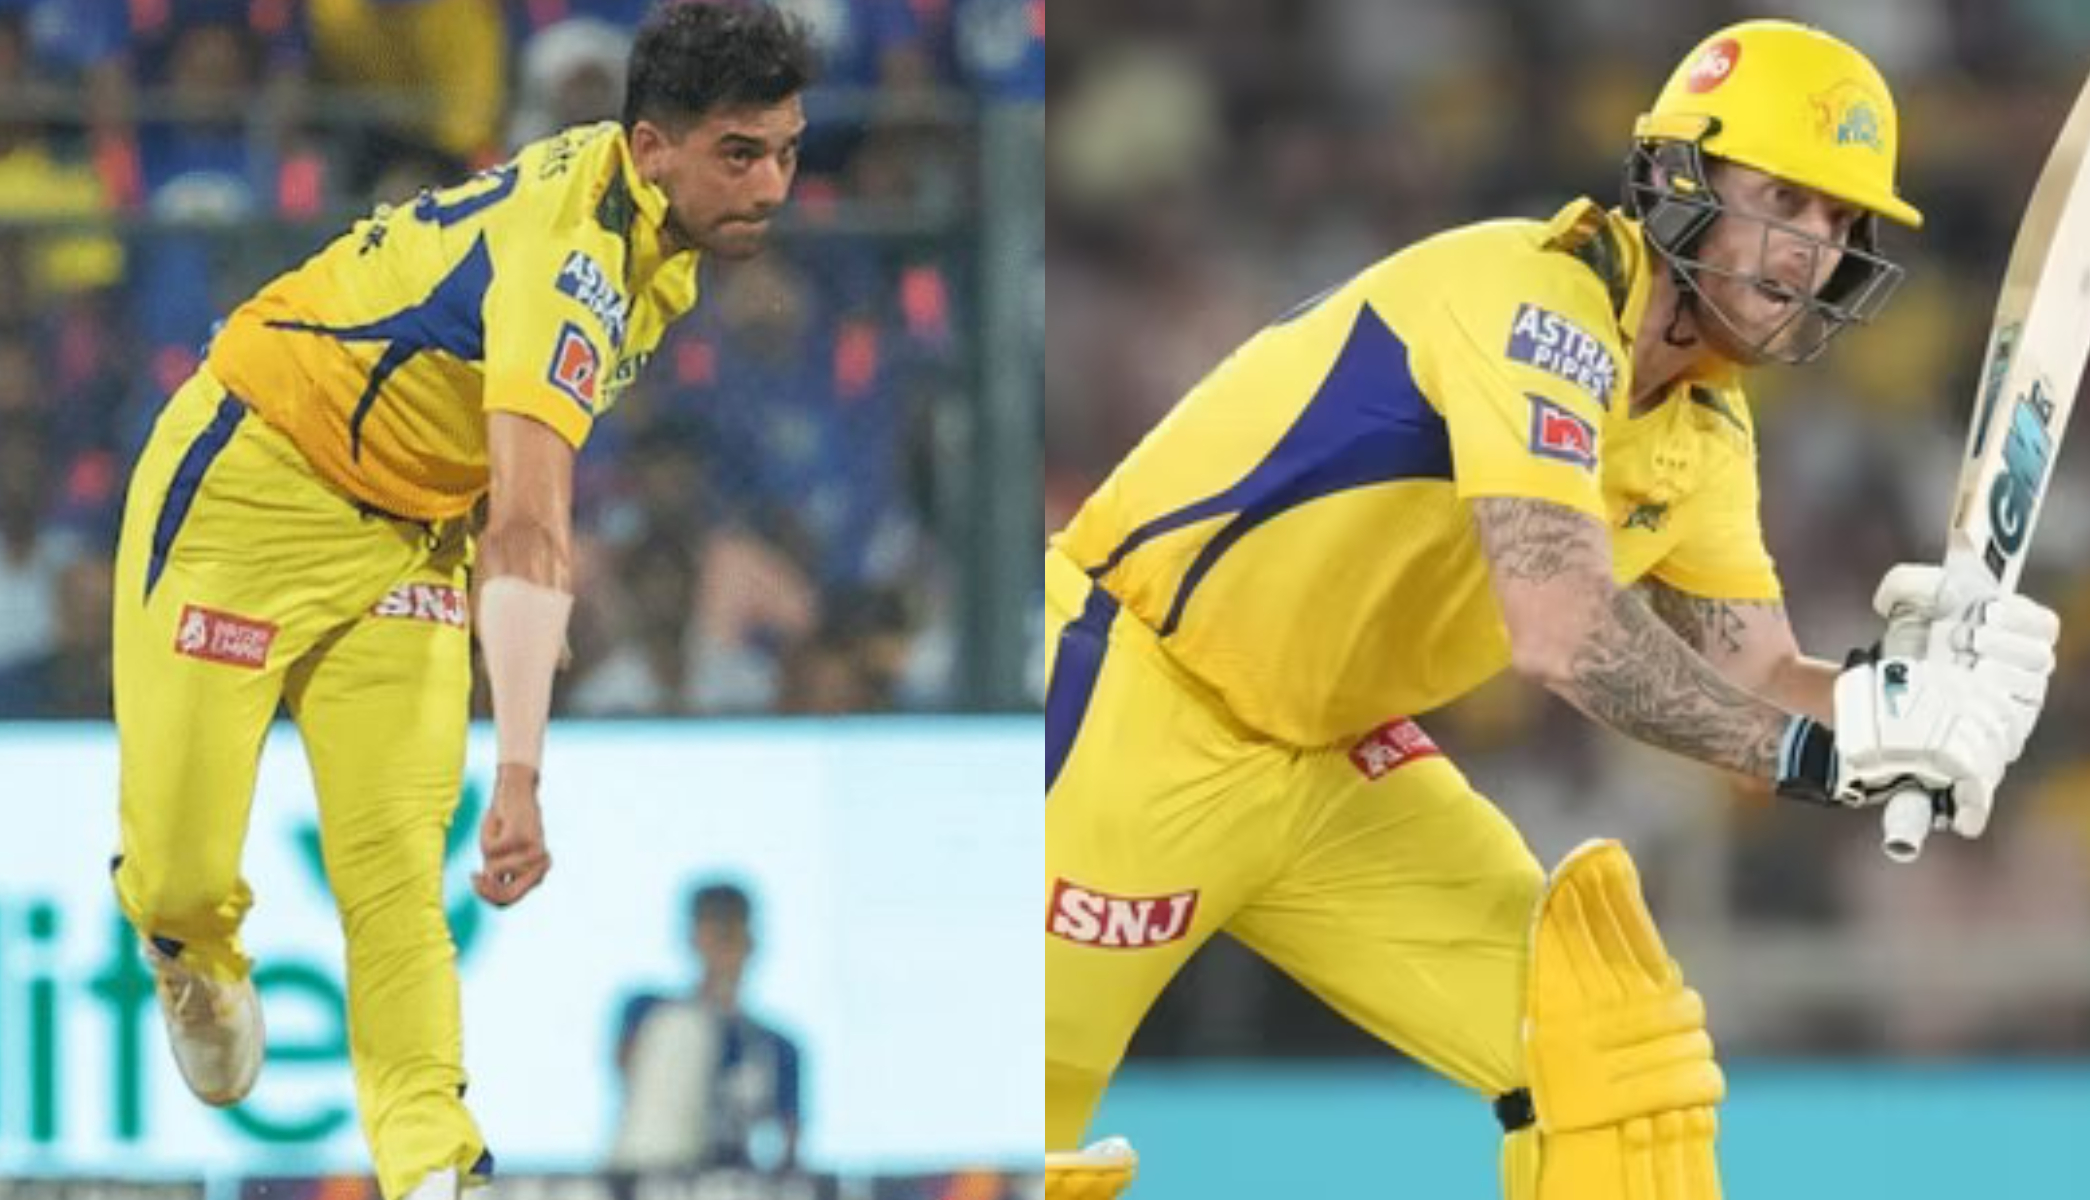 CSK gave update on injuries sustained by Deepak Chahar and Ben Stokes | BCCI-IPL